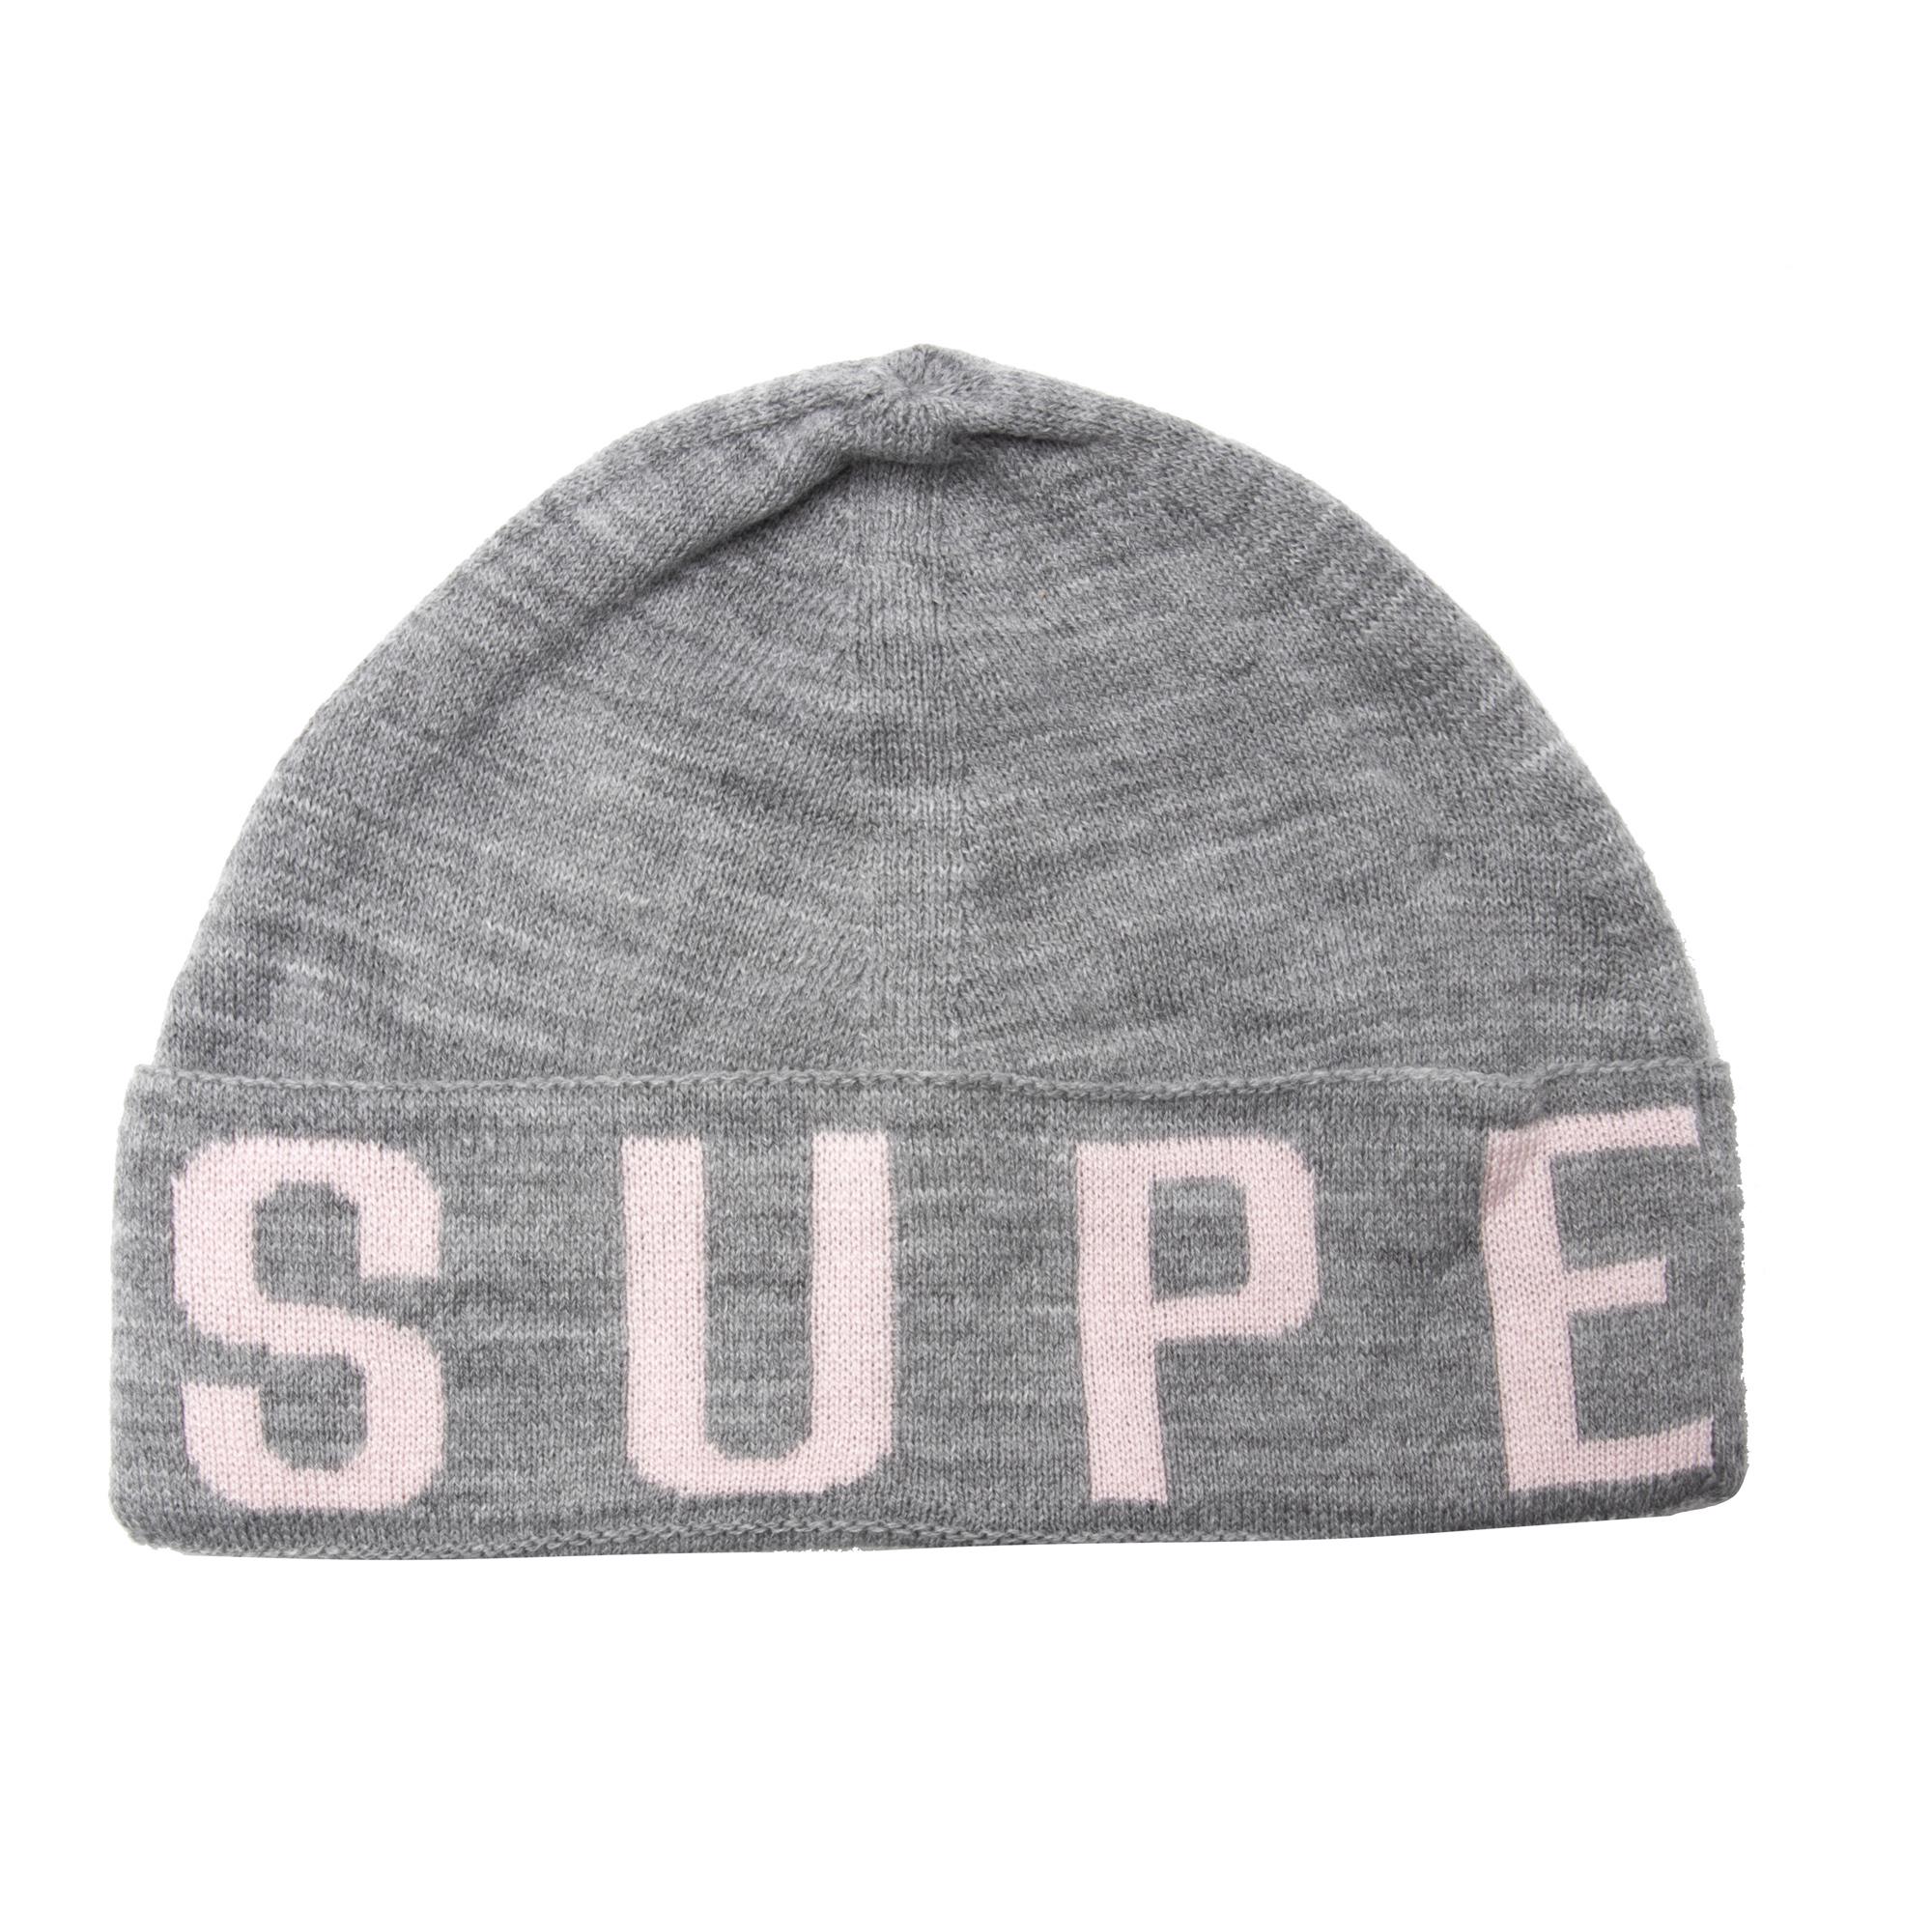 Cheap Superdry Gray Urban Logo Beanie | Soletrader Outlet